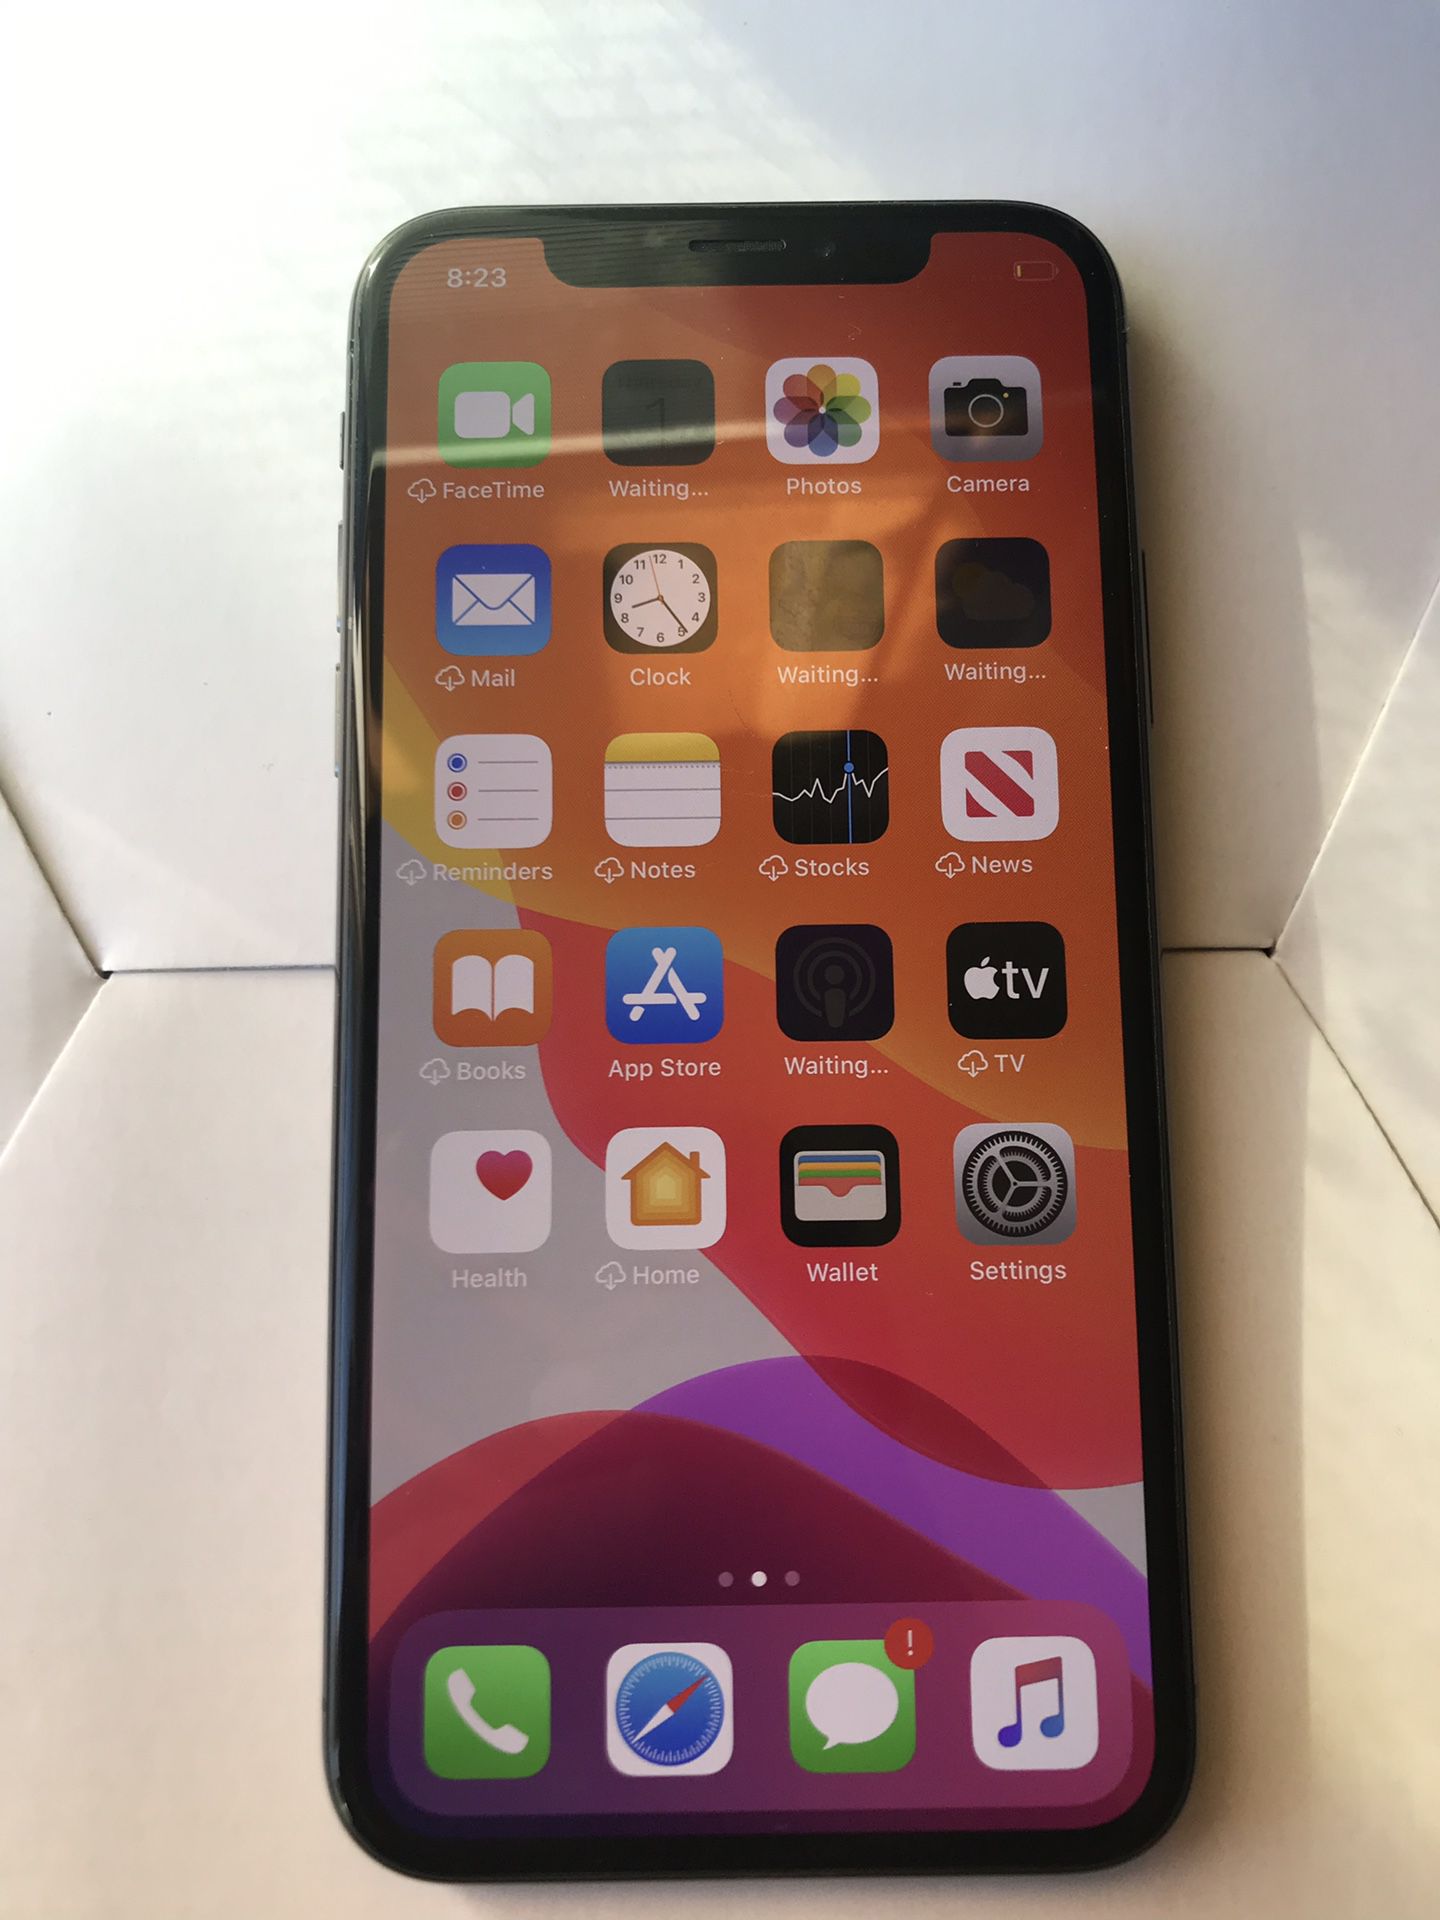 iPhone X 64gb - T-Mobile, Sprint, Boost, Metro Pcs - No iCloud or Passcode (not carrier unlocked)